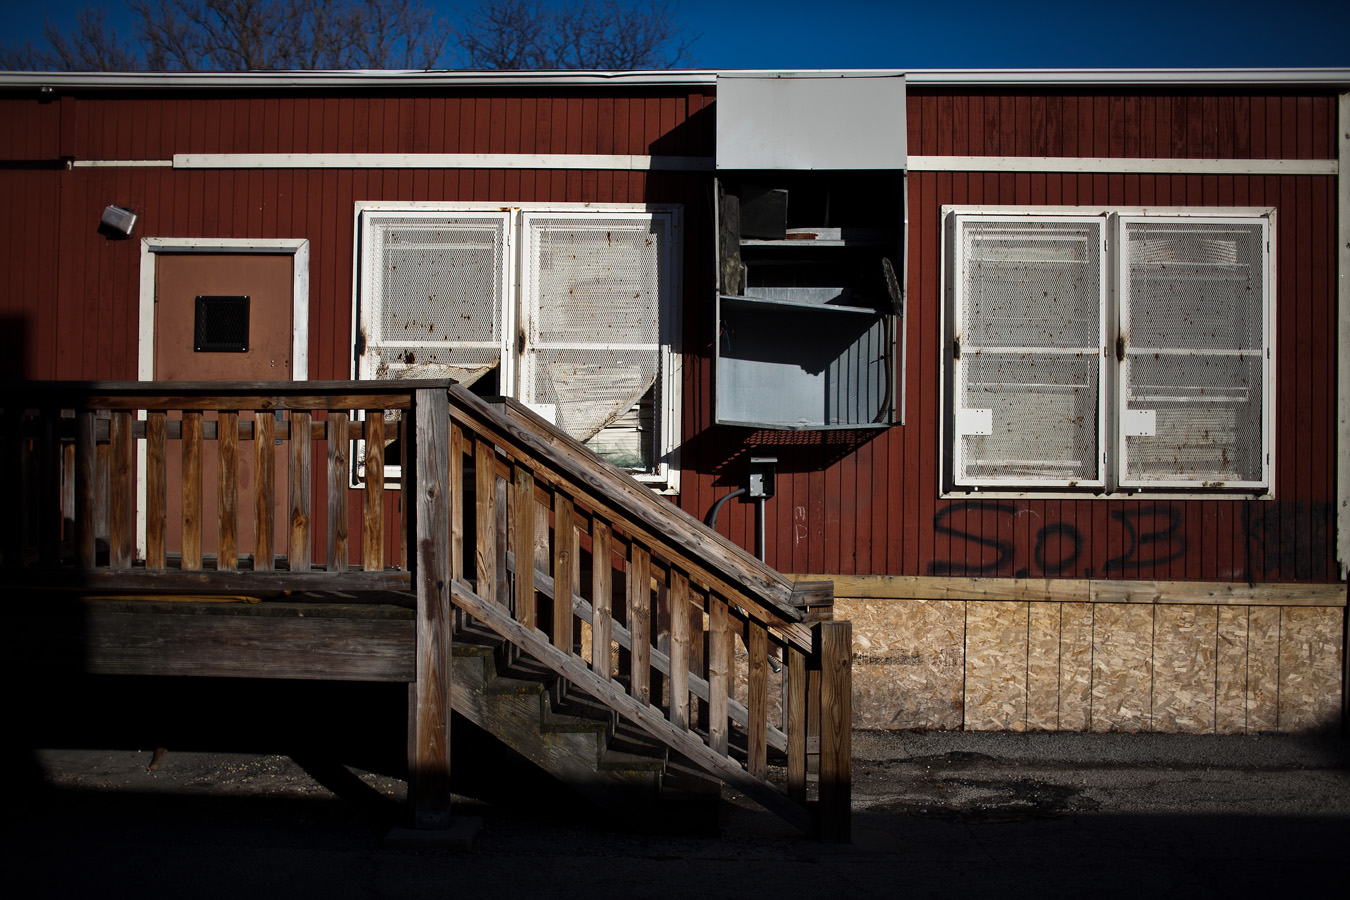   A modular classroom at the now-shuttered Guggenheim Elementary School in Englewood sits in disrepair. The school was one of four small elementary schools closed in 2012, displacing 467 students. The 50 schools slated to be closed in 2013 will affec